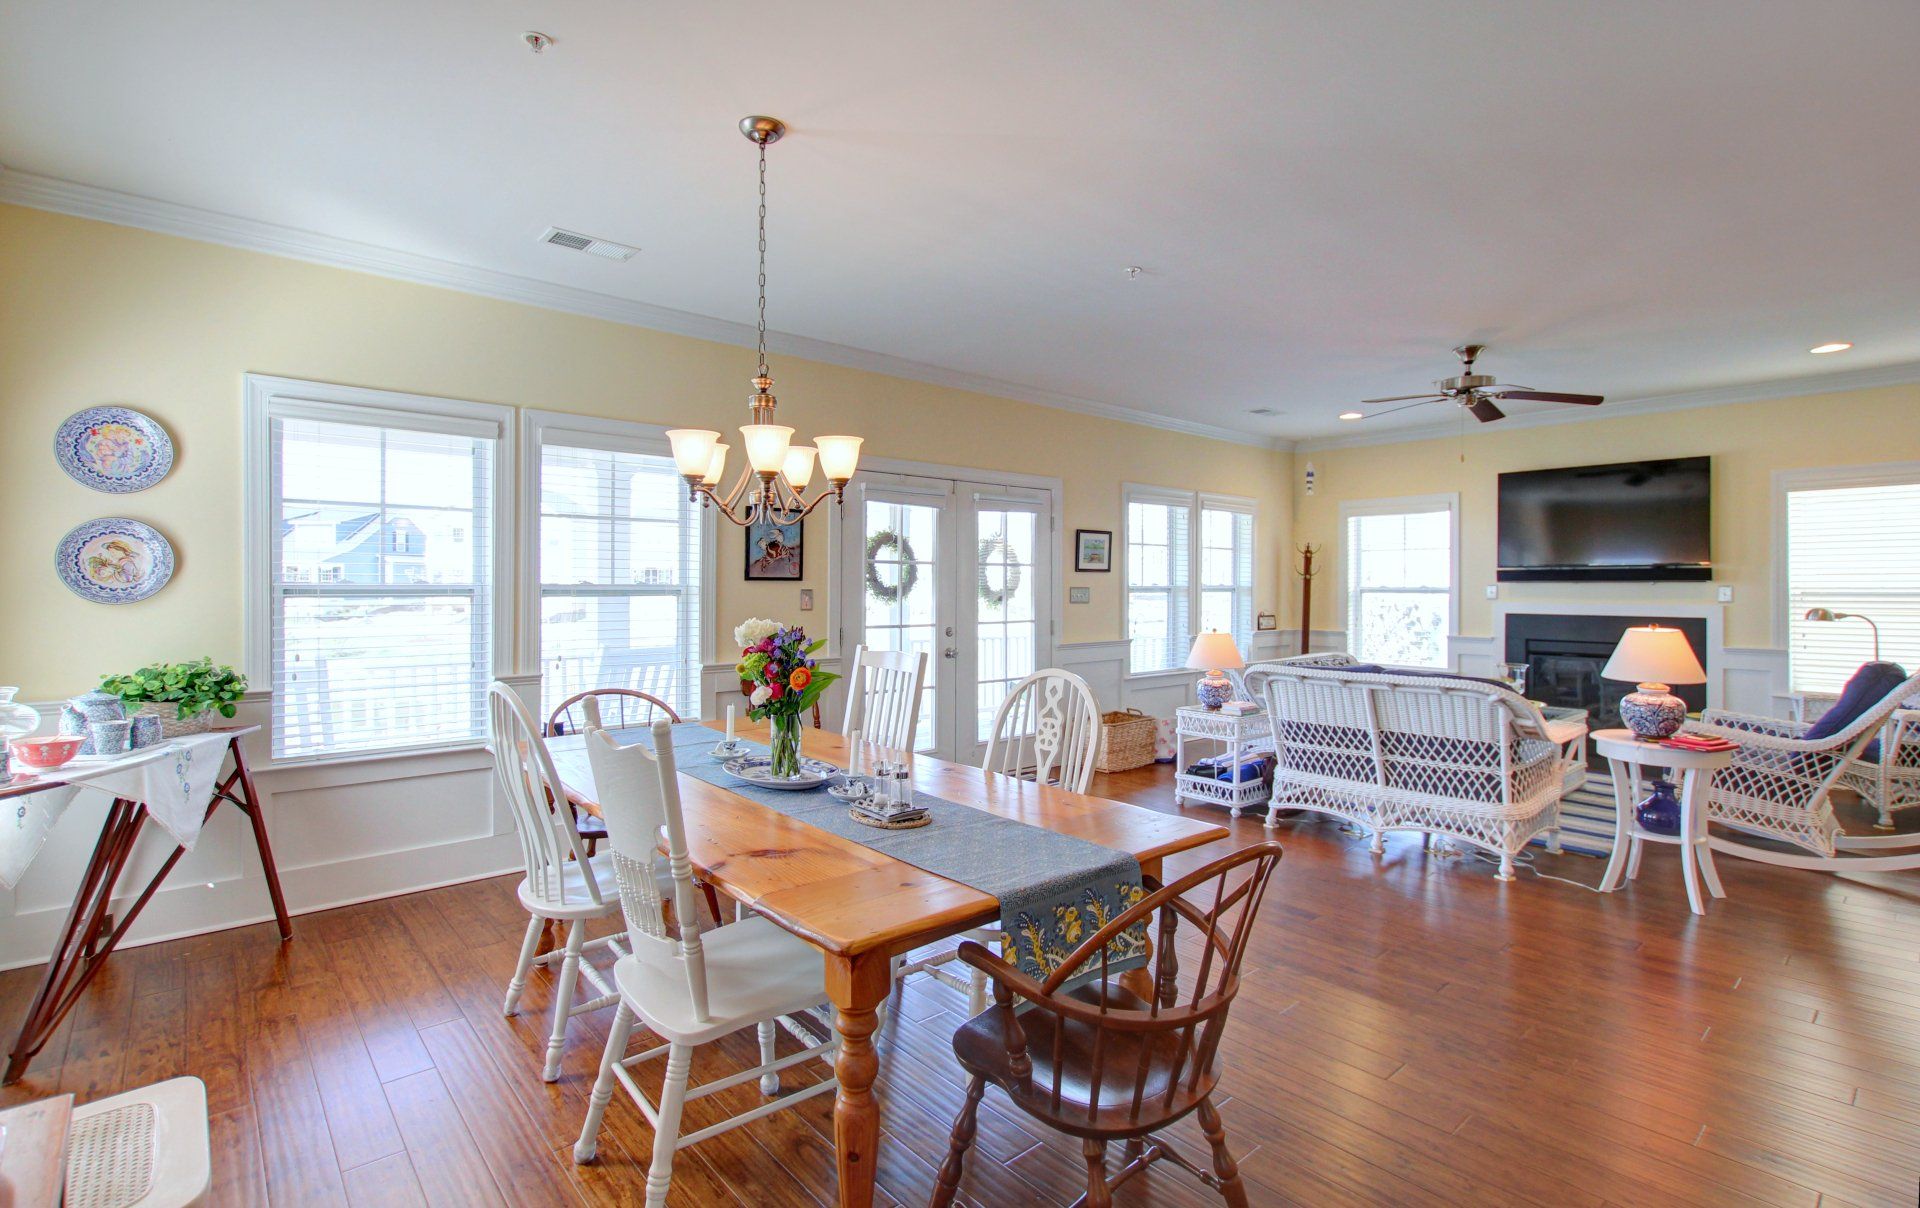 Dining room | Sawgrass Classic | Covell Communities | Chester, Maryland 21619